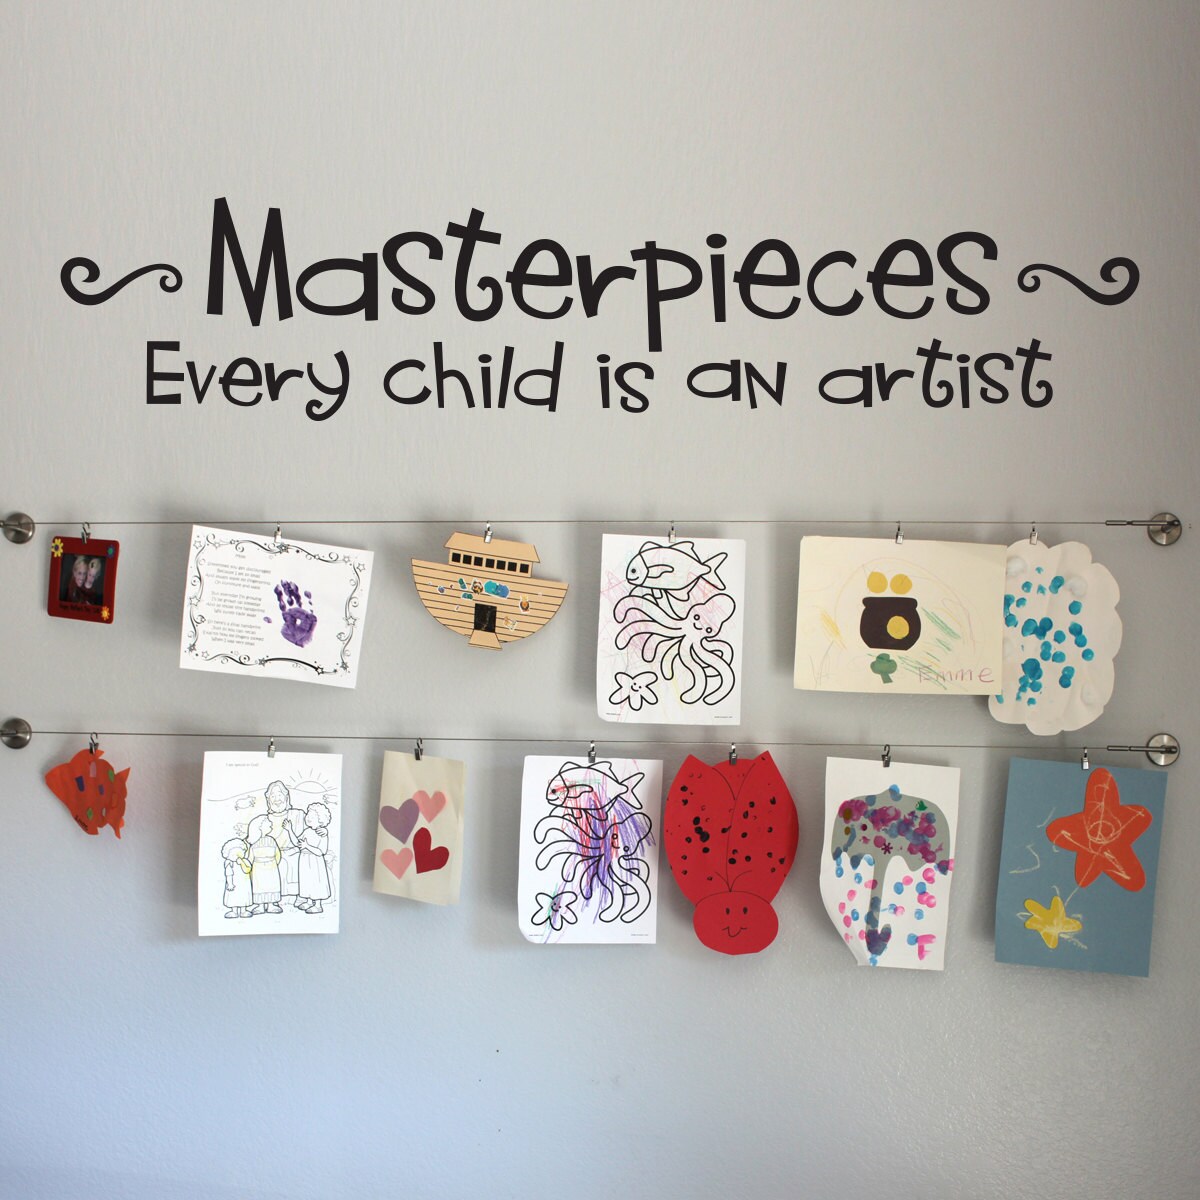 Masterpieces Decal - Every Child is an Artist Quote - Children Artwork Display Decal - Wall Art Decal